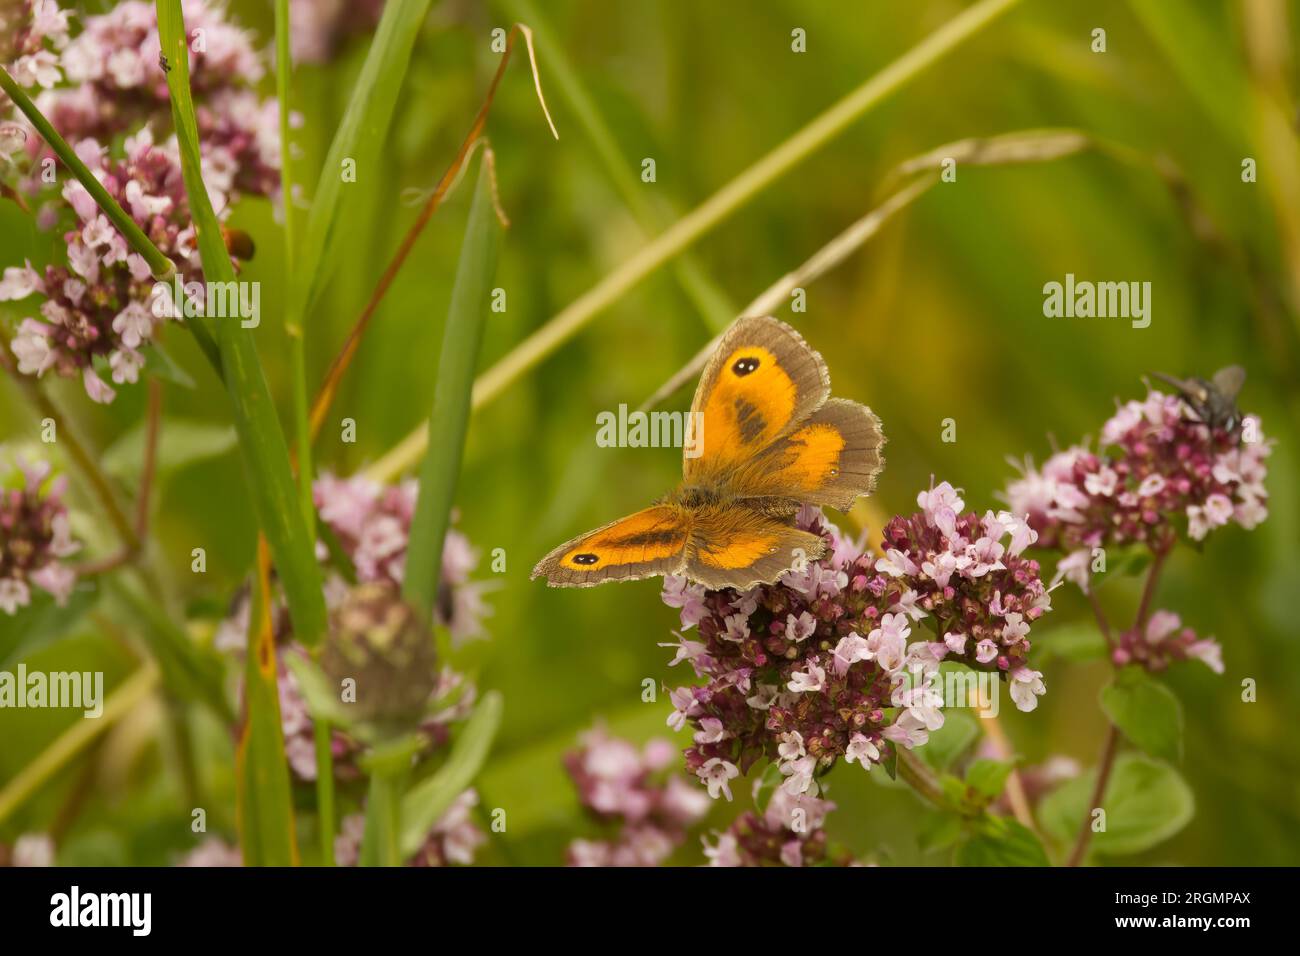 Gatekeeper, or Hedge Brown butterfly (Pyronia tithonus), Stock Photo